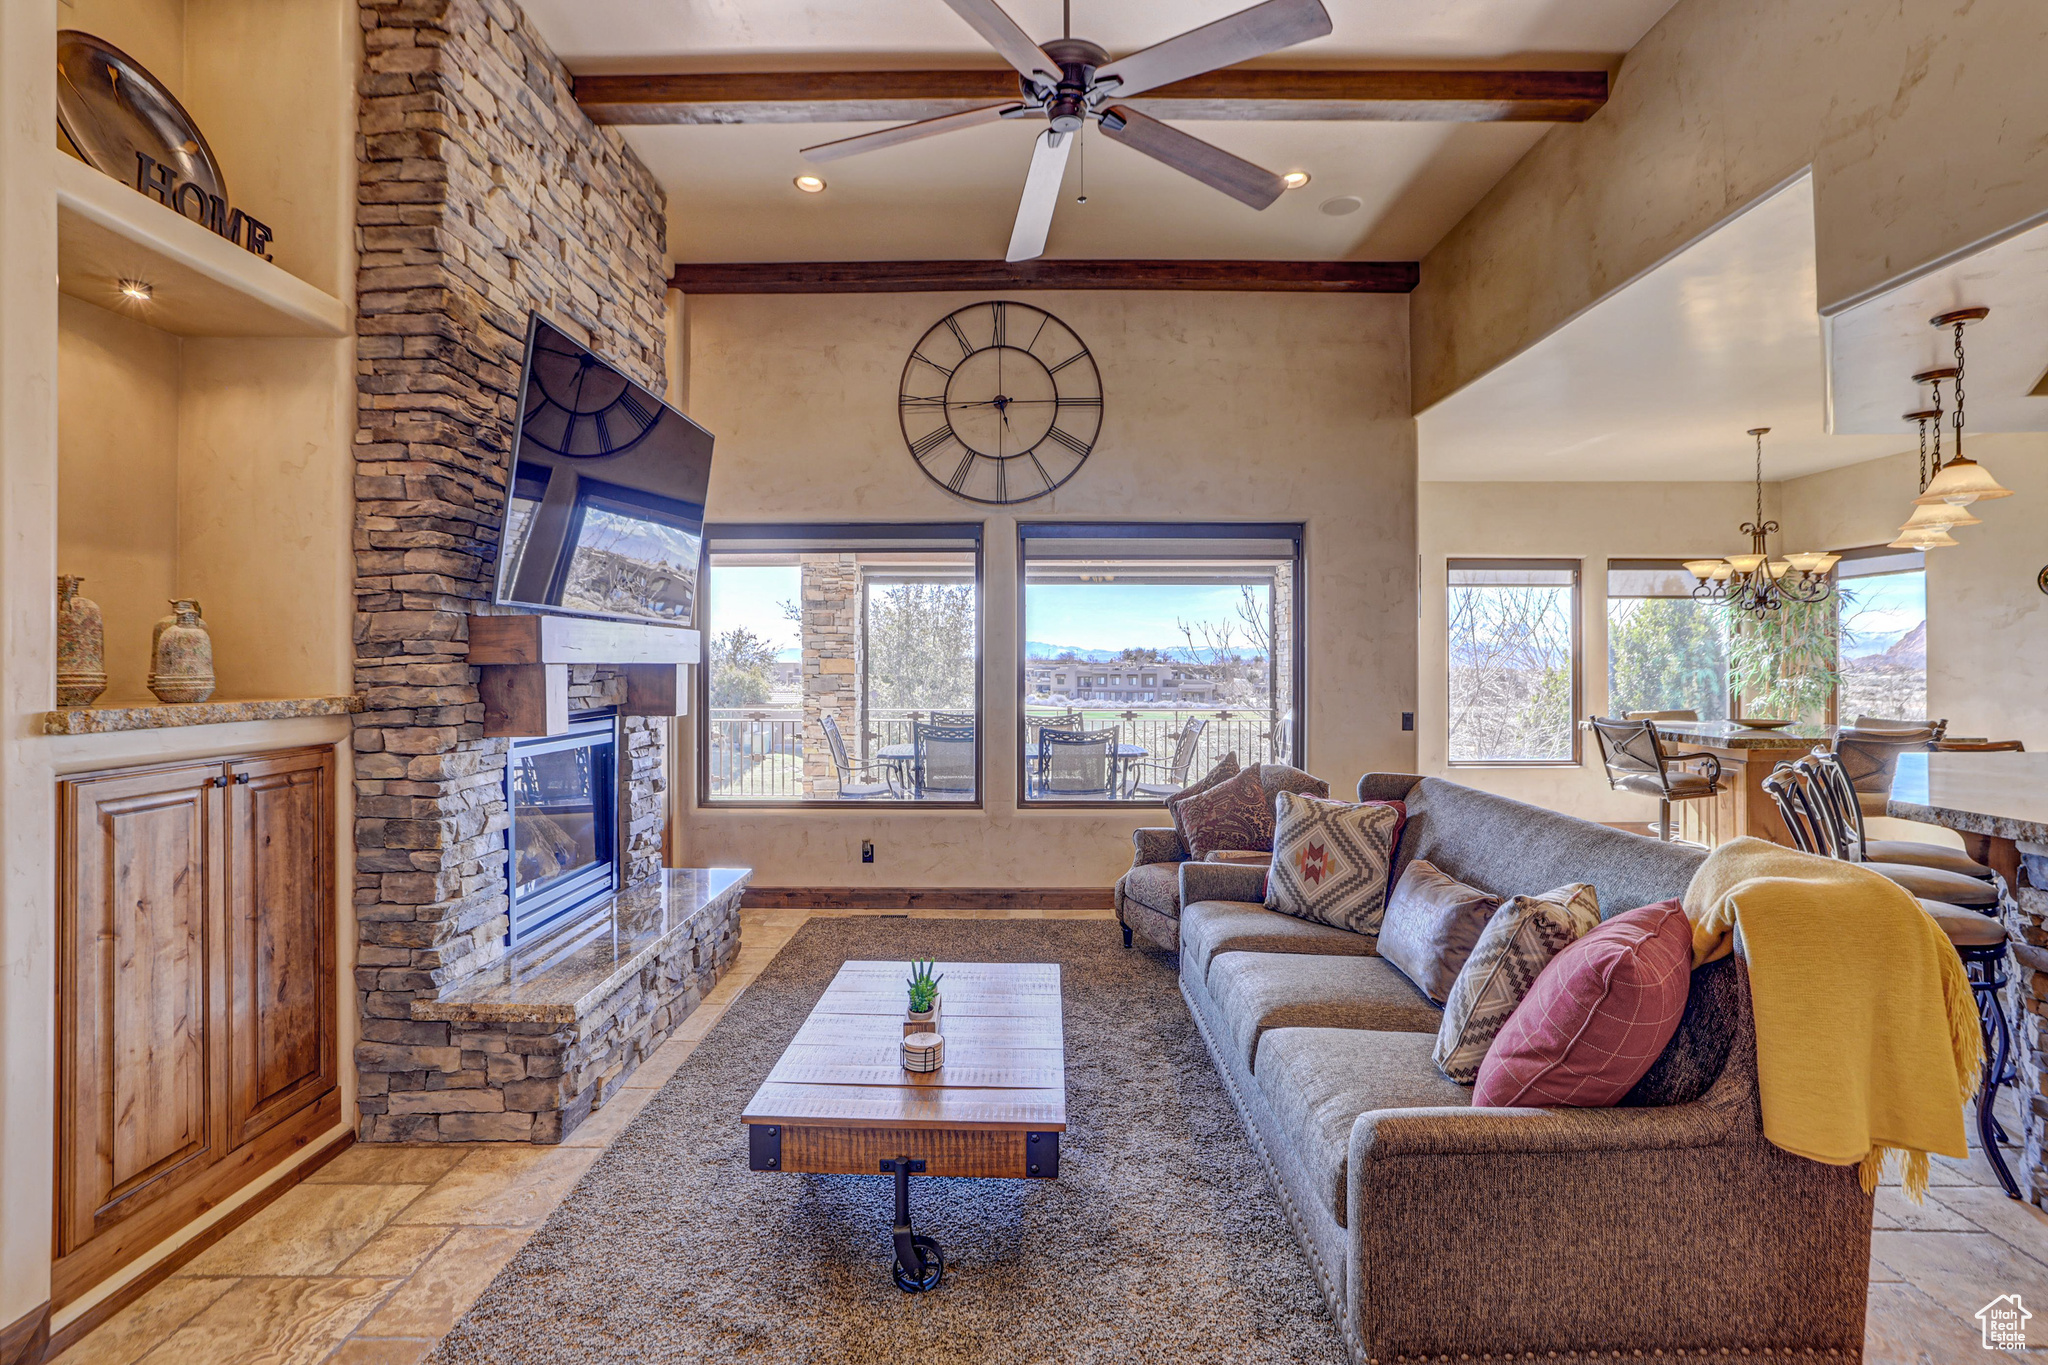 Living room featuring a stone fireplace, beamed ceiling, ceiling fan with notable chandelier, and light tile floors